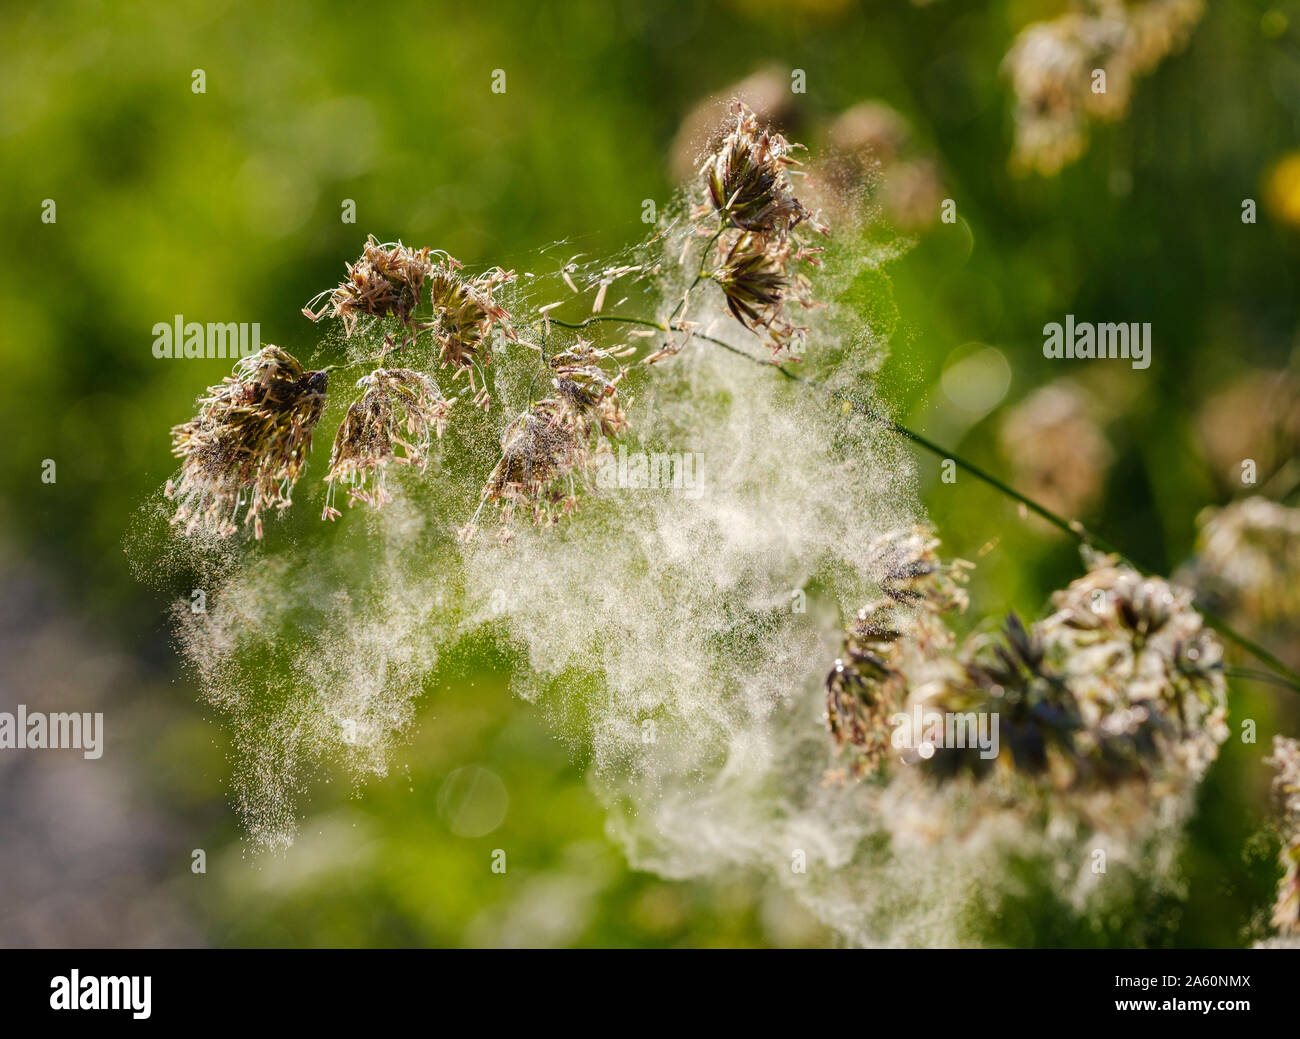 Close-up of spider web on dry plant in forest, Bavaria, Germany Stock Photo